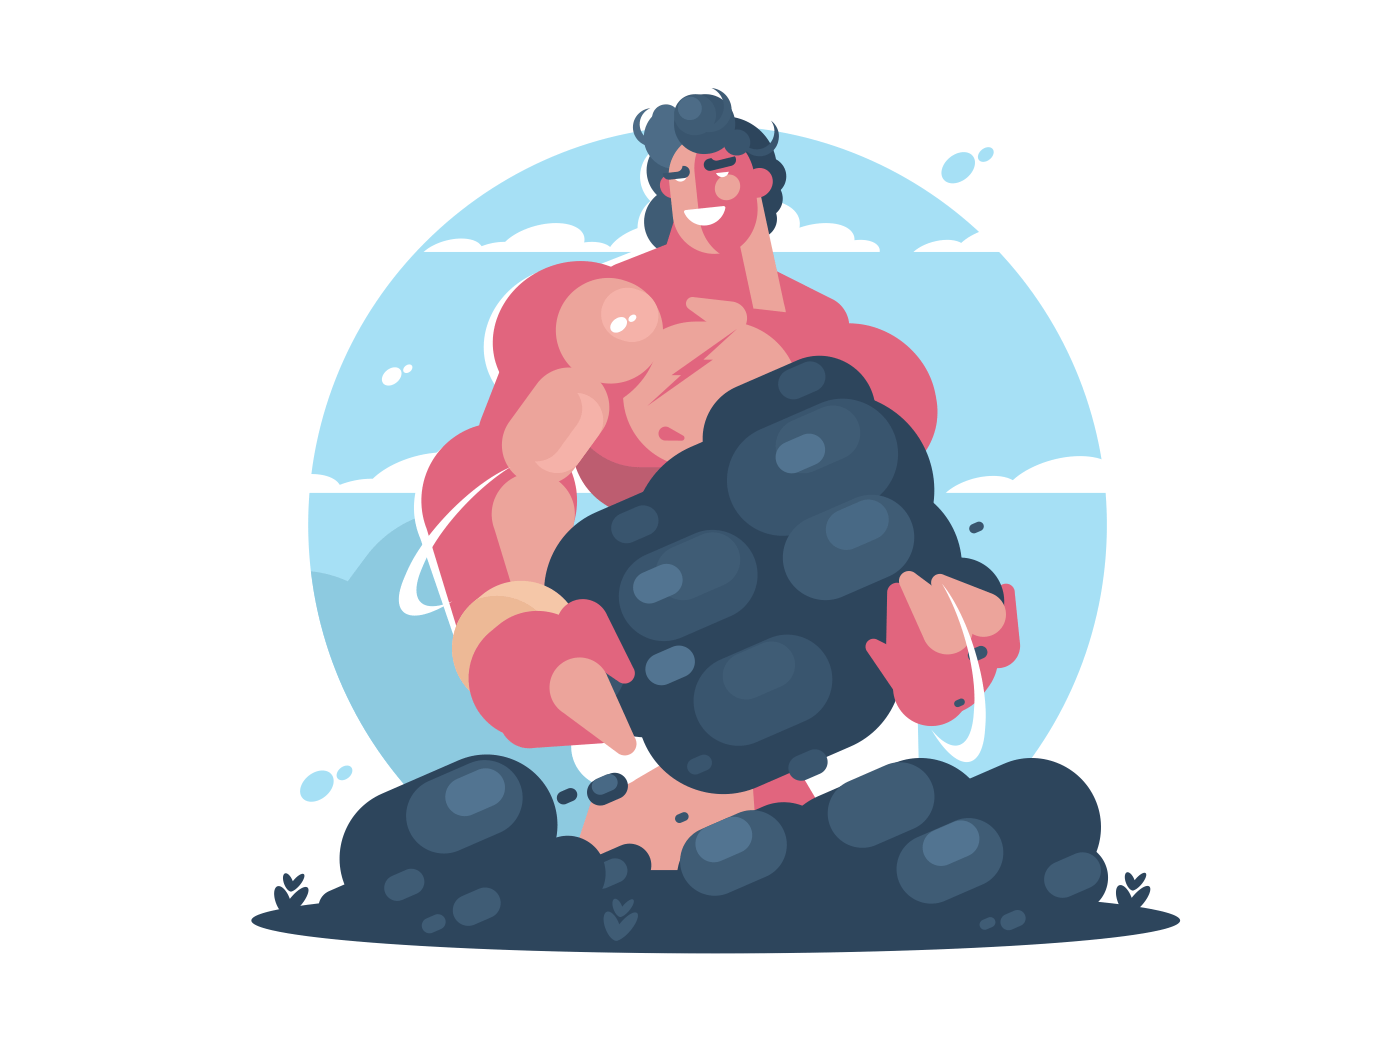 Mythological character of Hercules. Strong muscular guy. Vector flat illustration